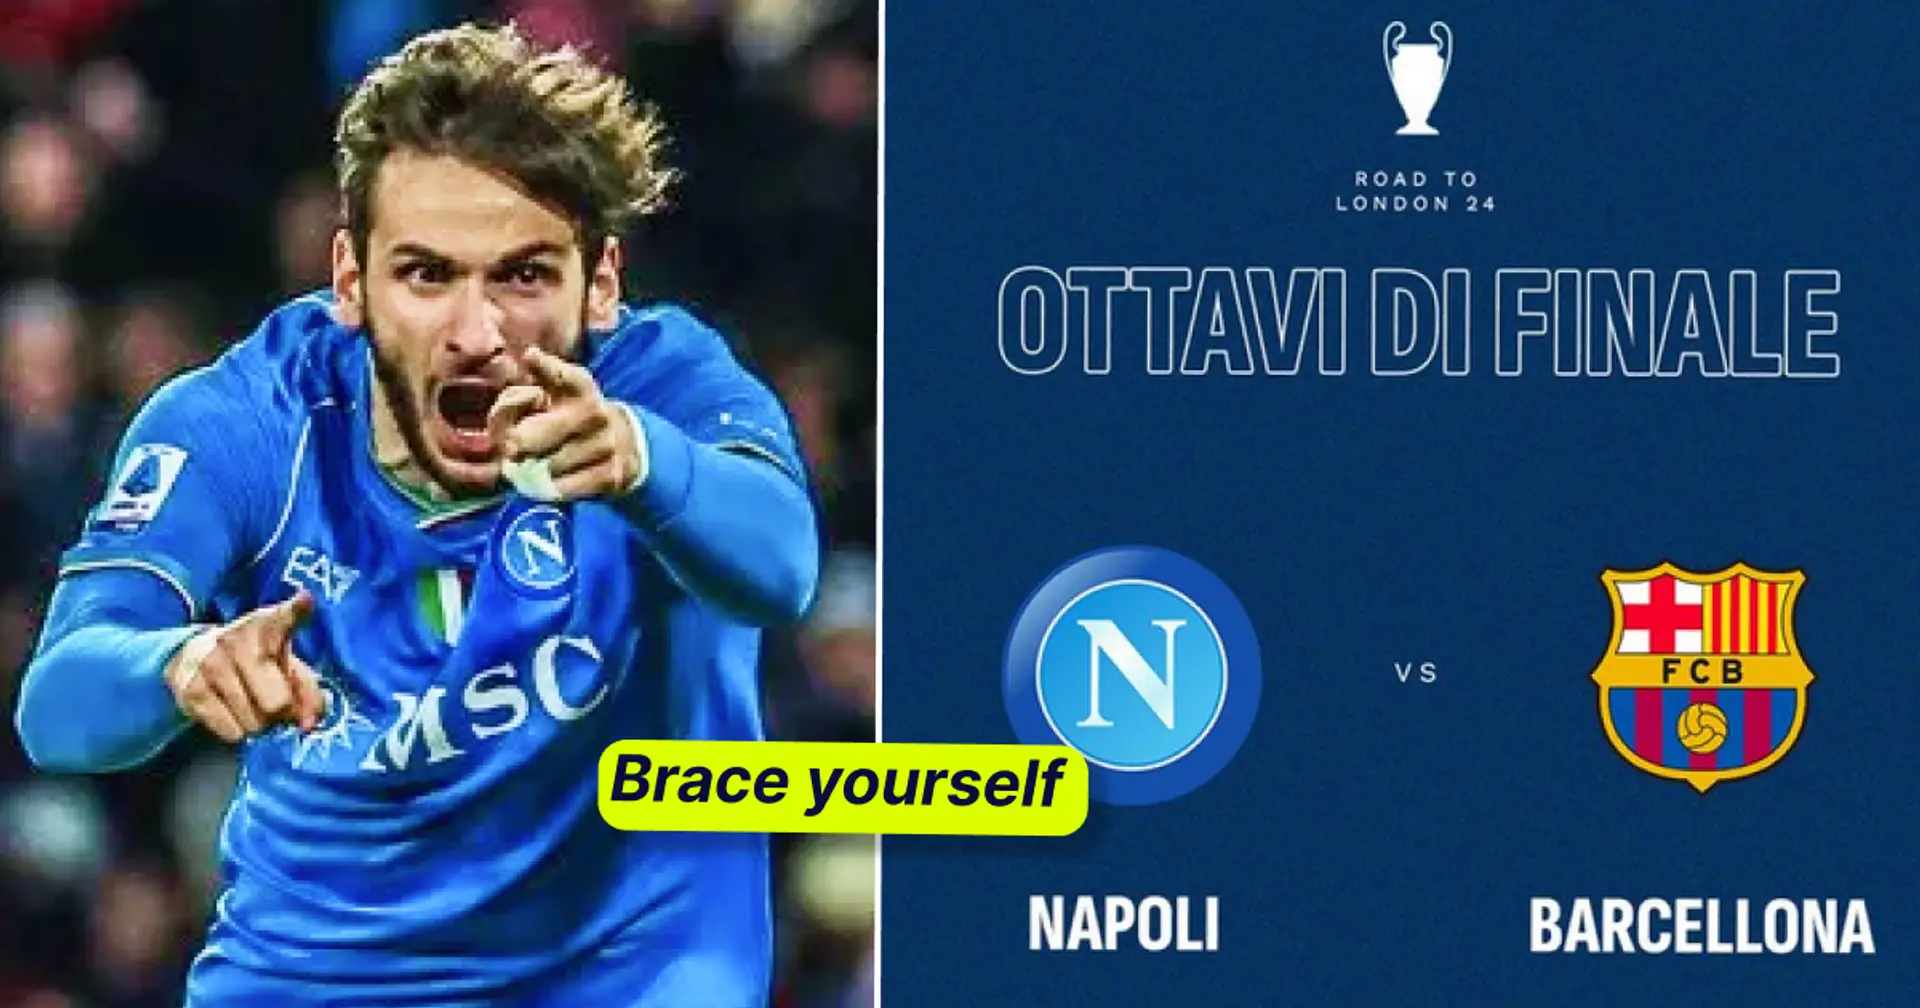 'Kvara will eat you': Napoli fans react to drawing Barca in Champions League knockout